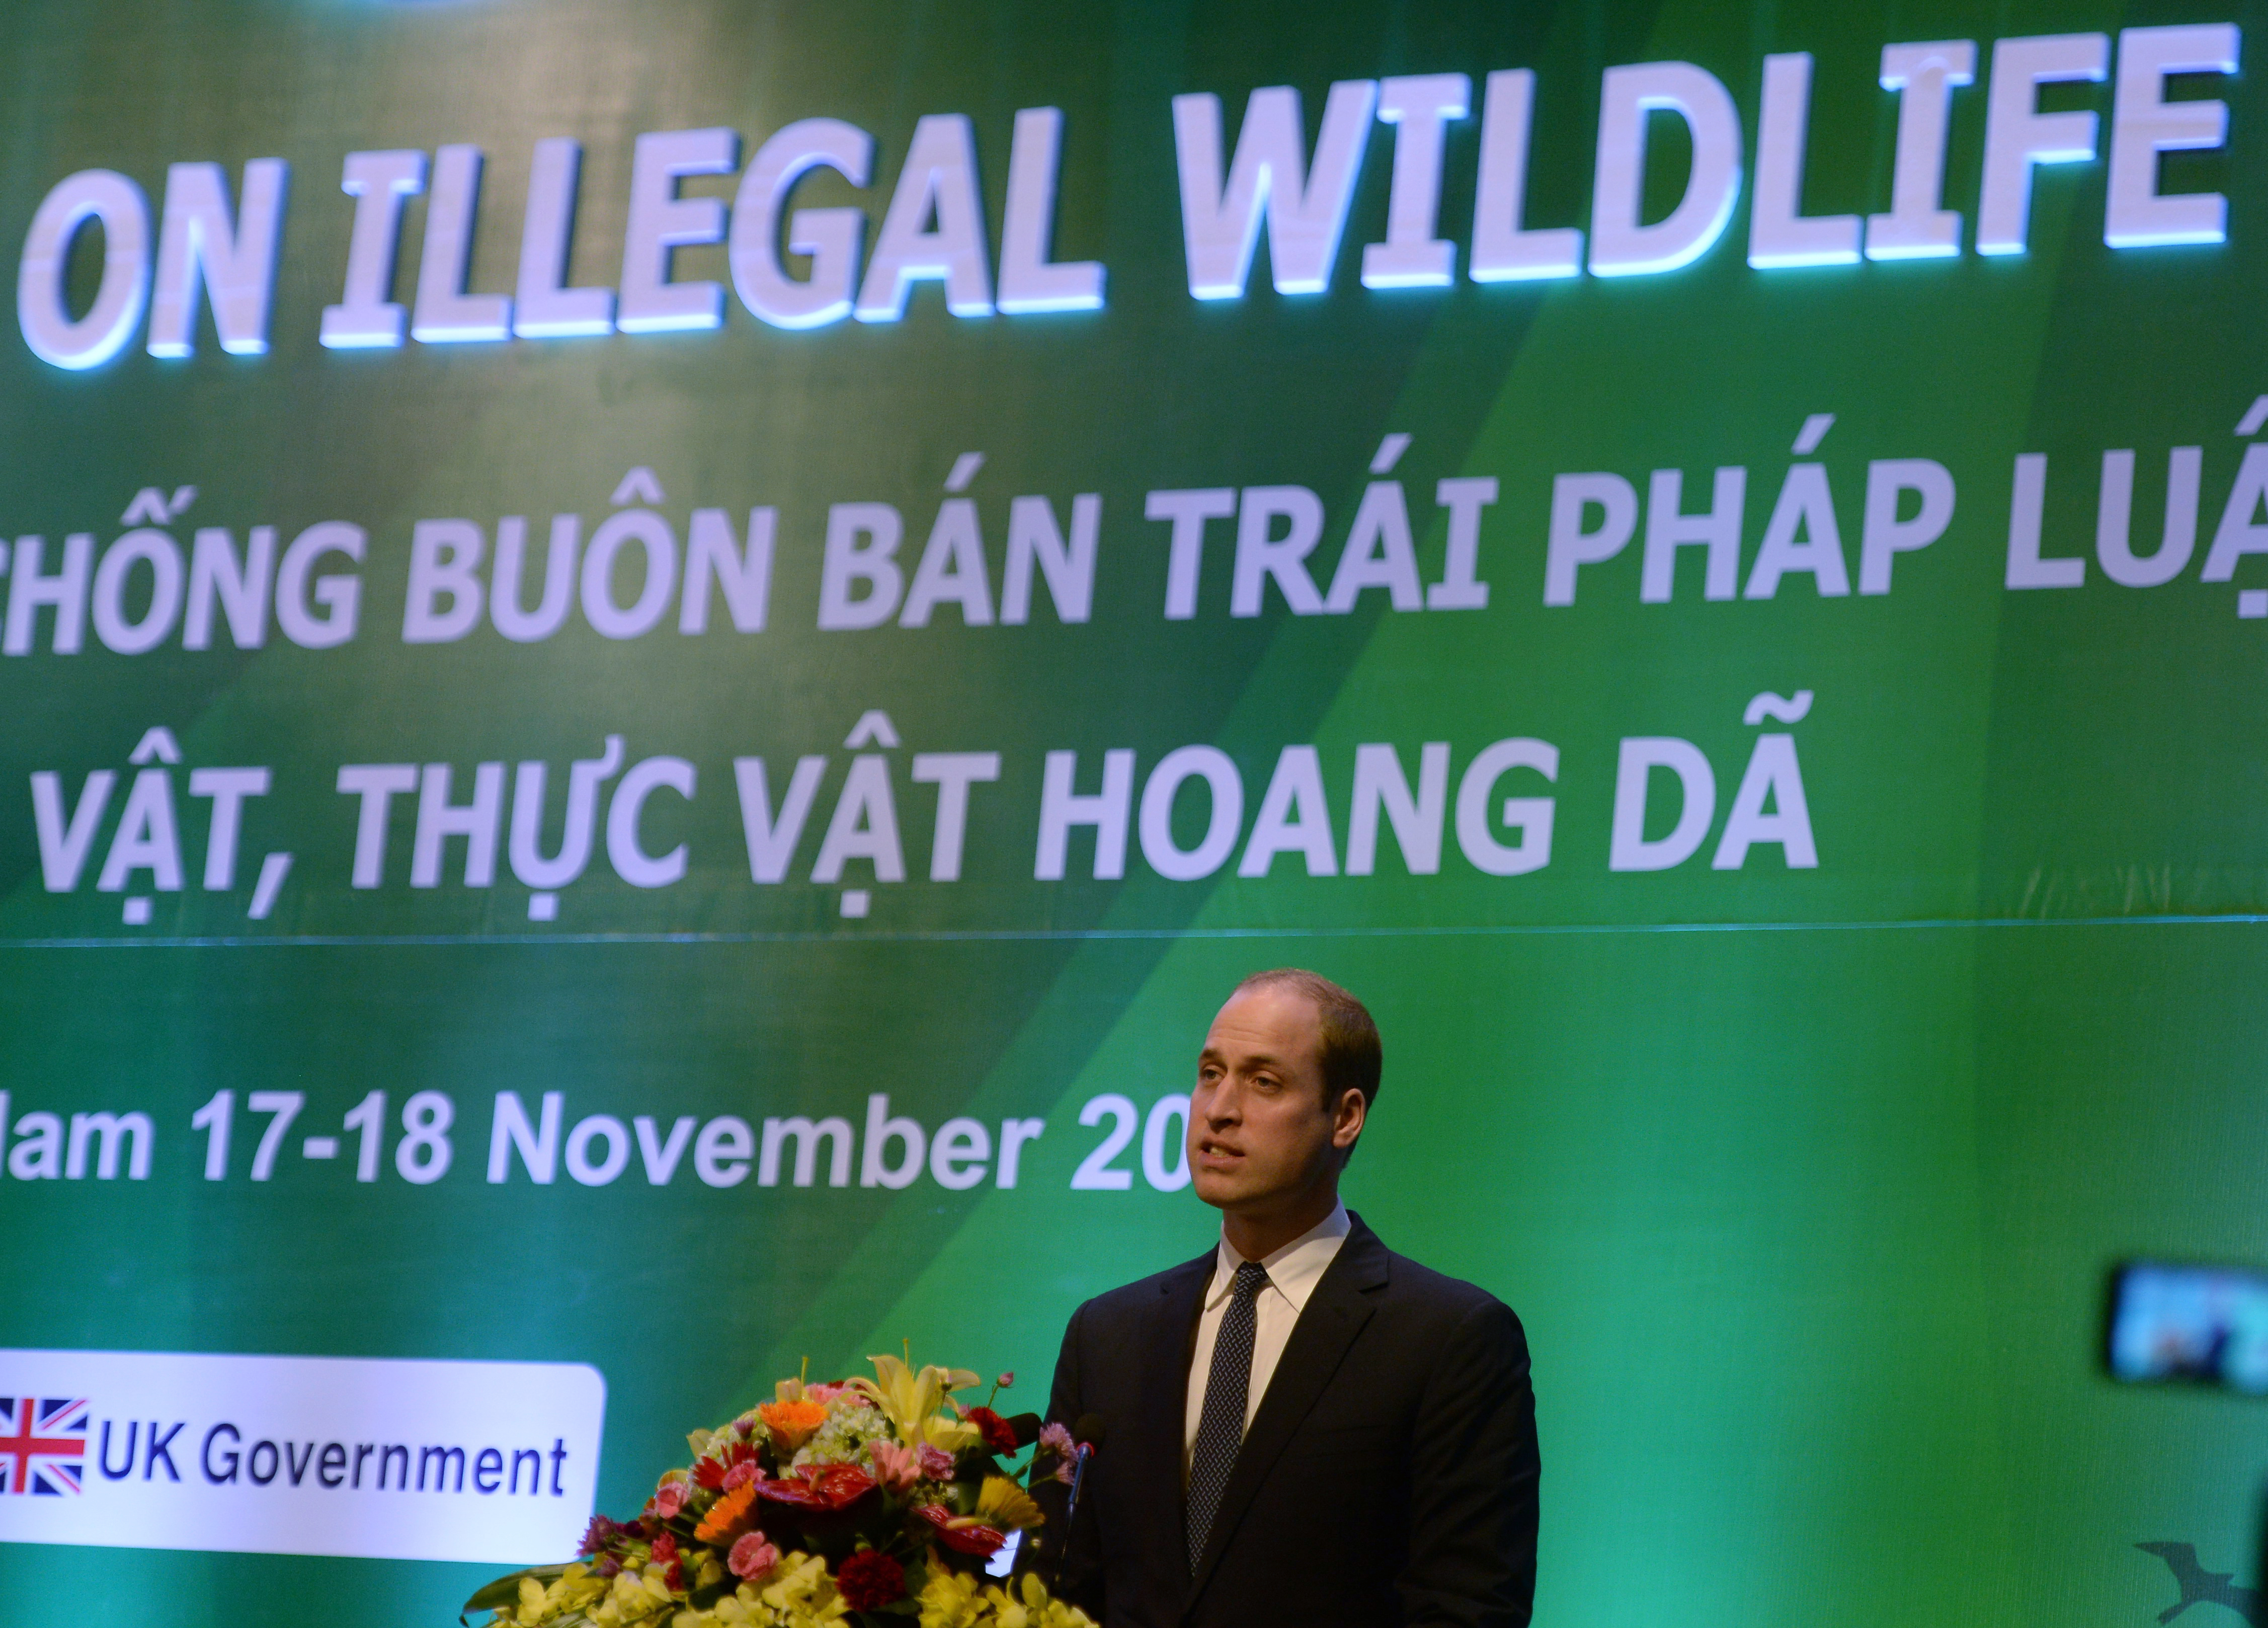 Britain's Prince William, Duke of Cambridge delivers a speech at the opening of the Hanoi conference on Illegal Wildlife Trade in Hanoi on November 17, 2016. / AFP PHOTO / HOANG DINH NAM